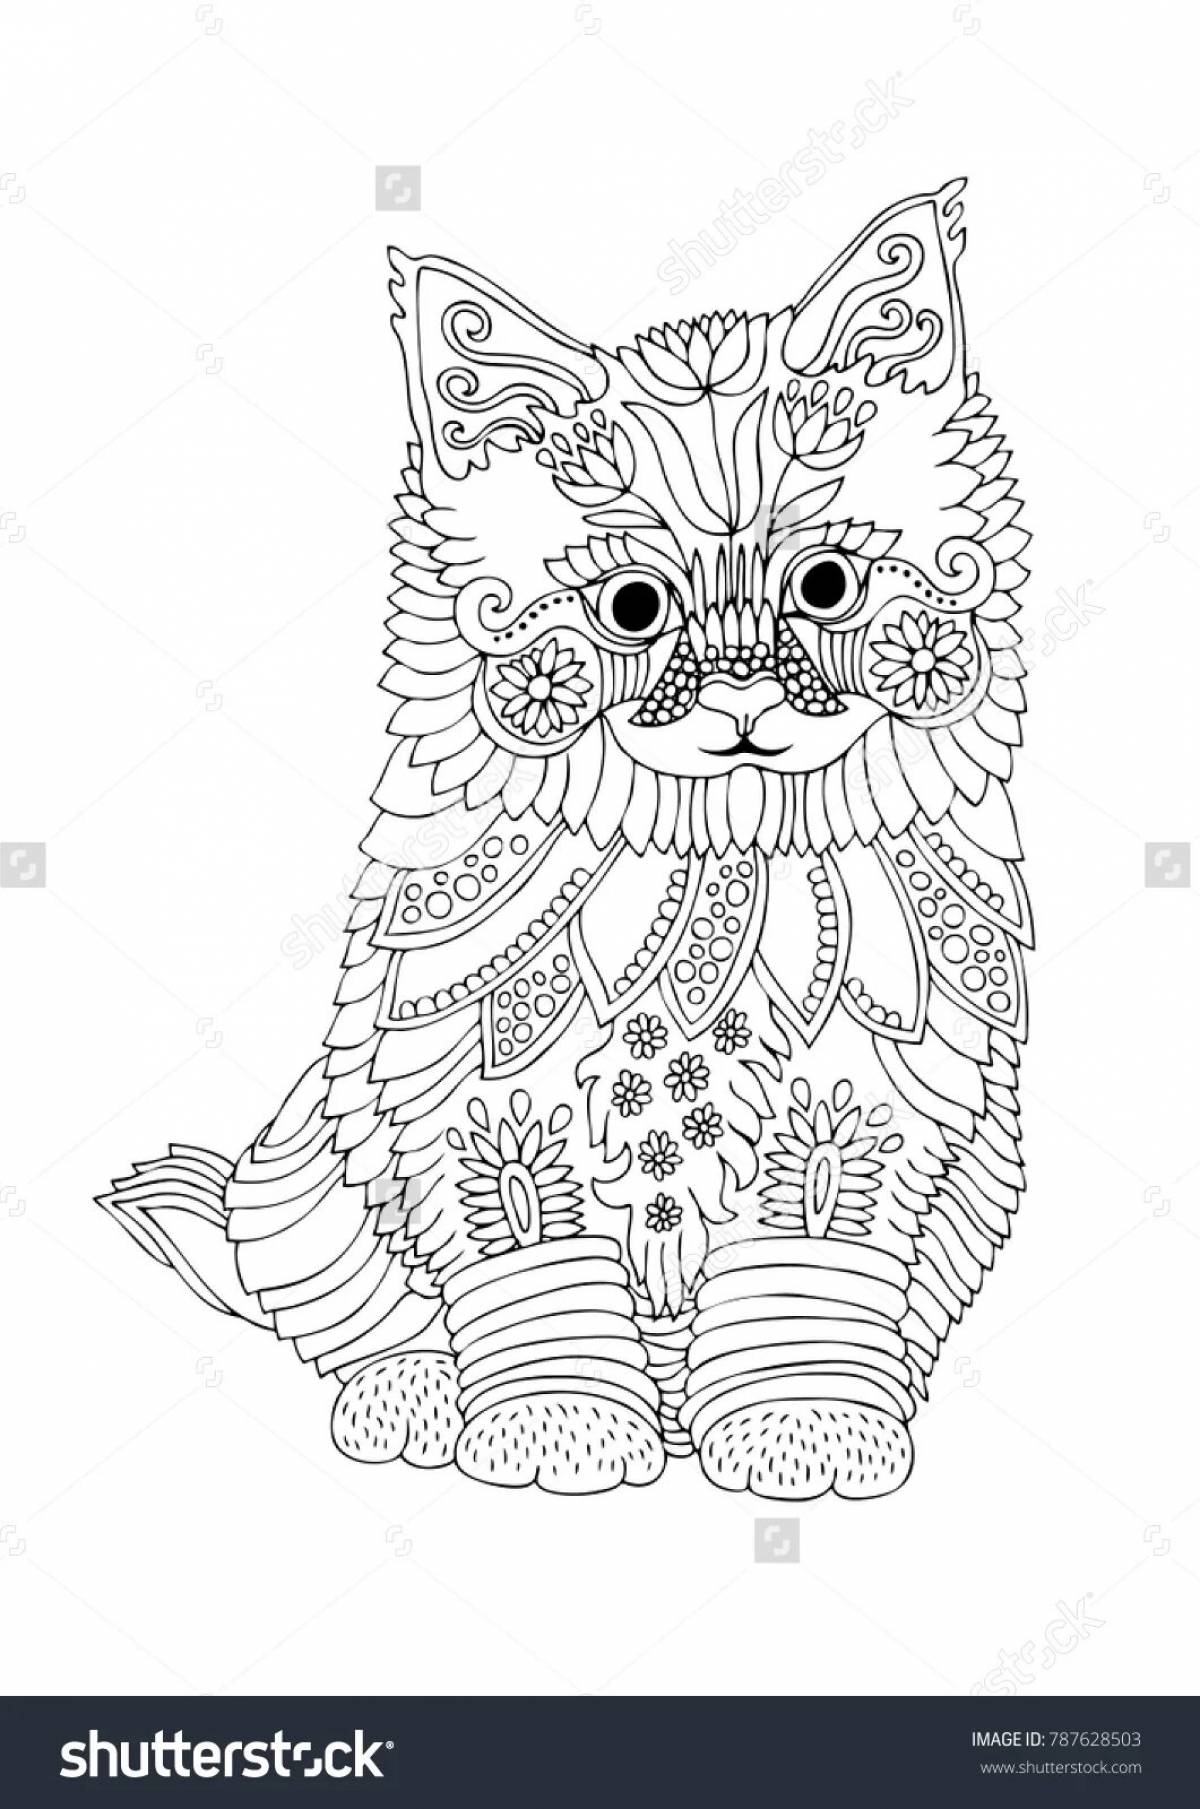 Glitter patterned cat coloring book